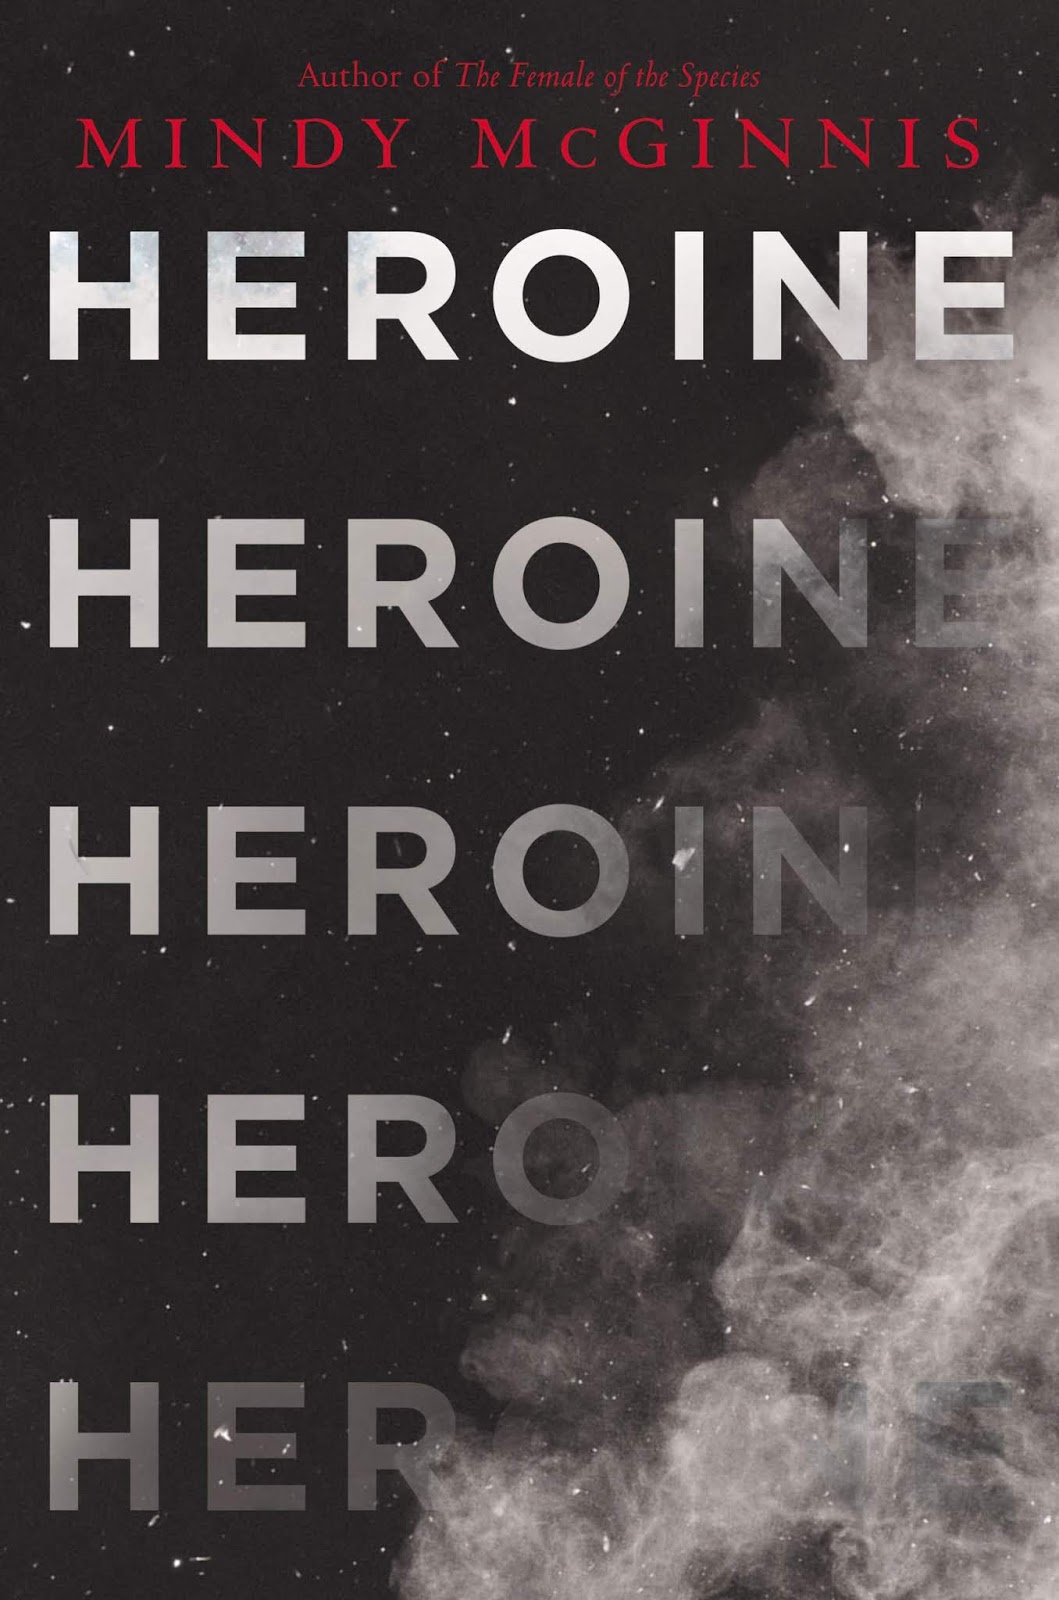 Heroine by Mindy McGinnis | Superior Young Adult Fiction | Review